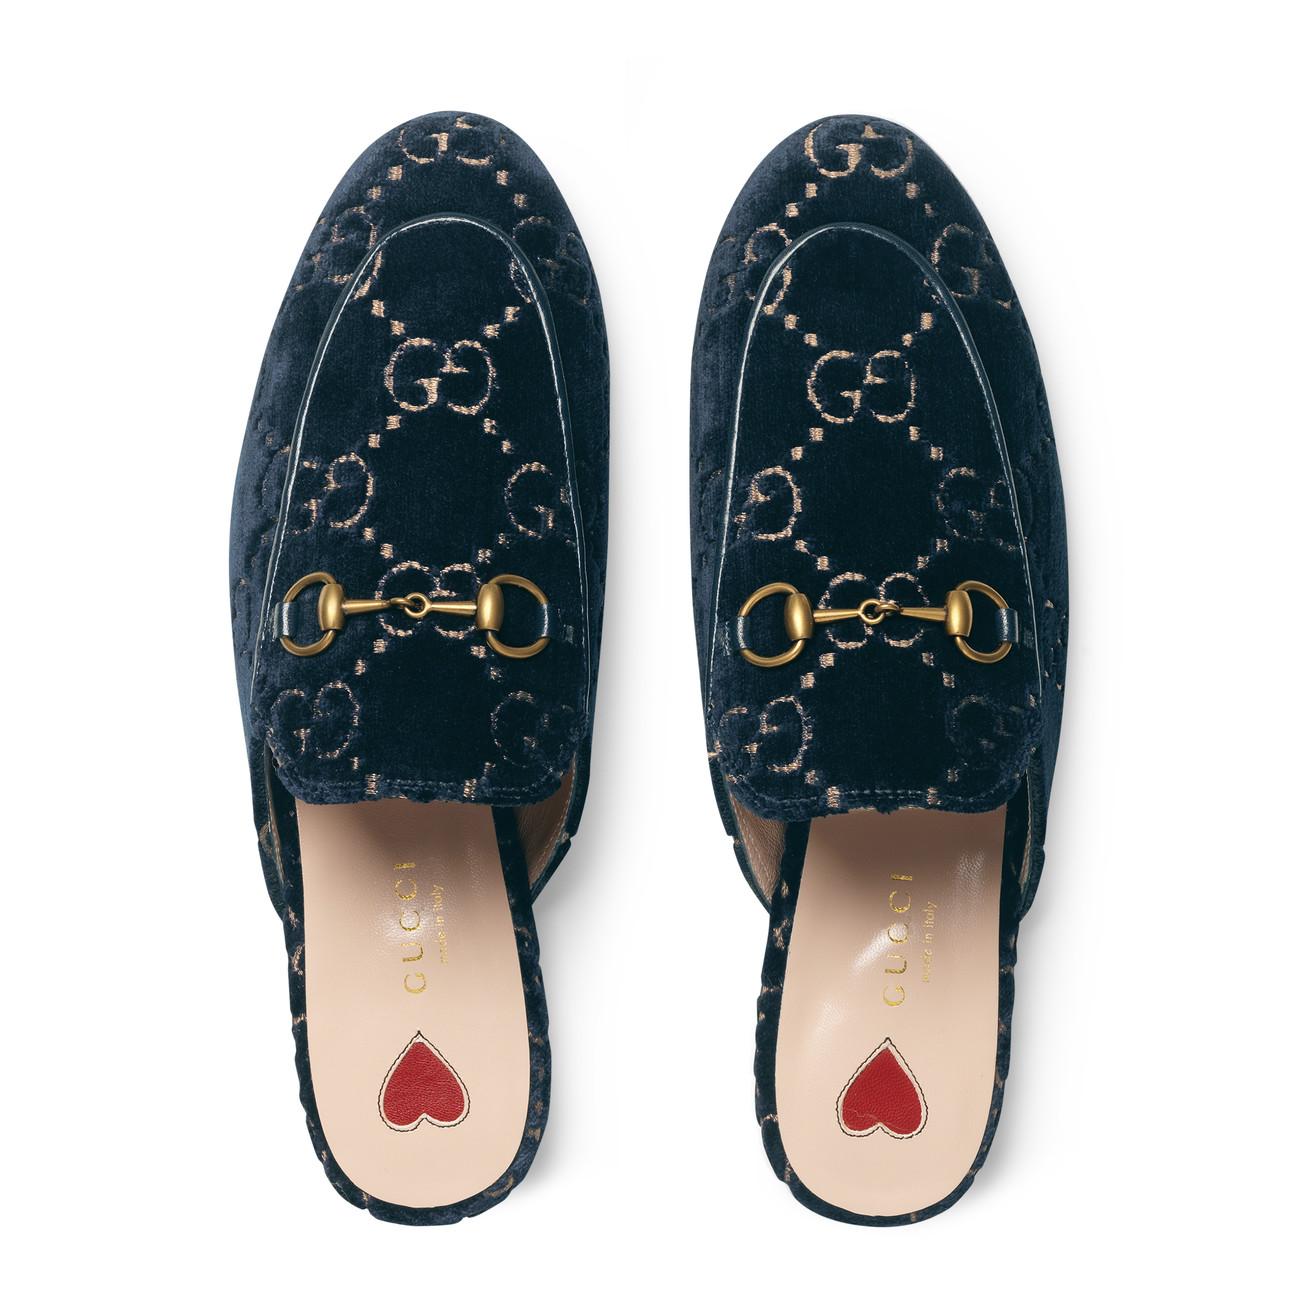 Gucci Princetown Velvet Backless Loafers in Blue - Lyst